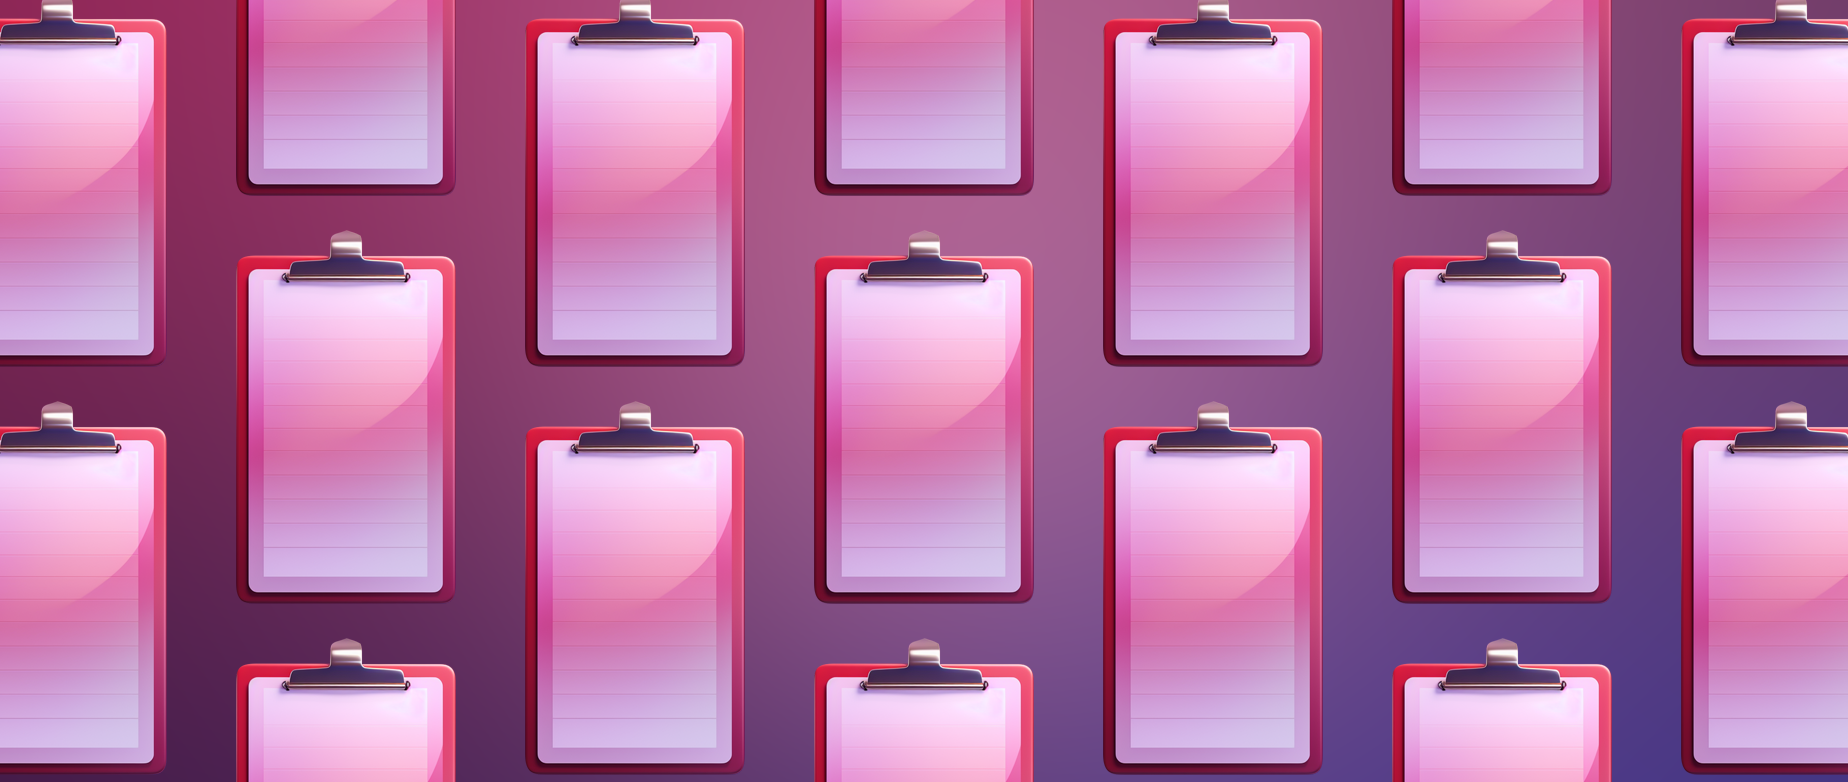 An array of red clipboards on a red purple background.